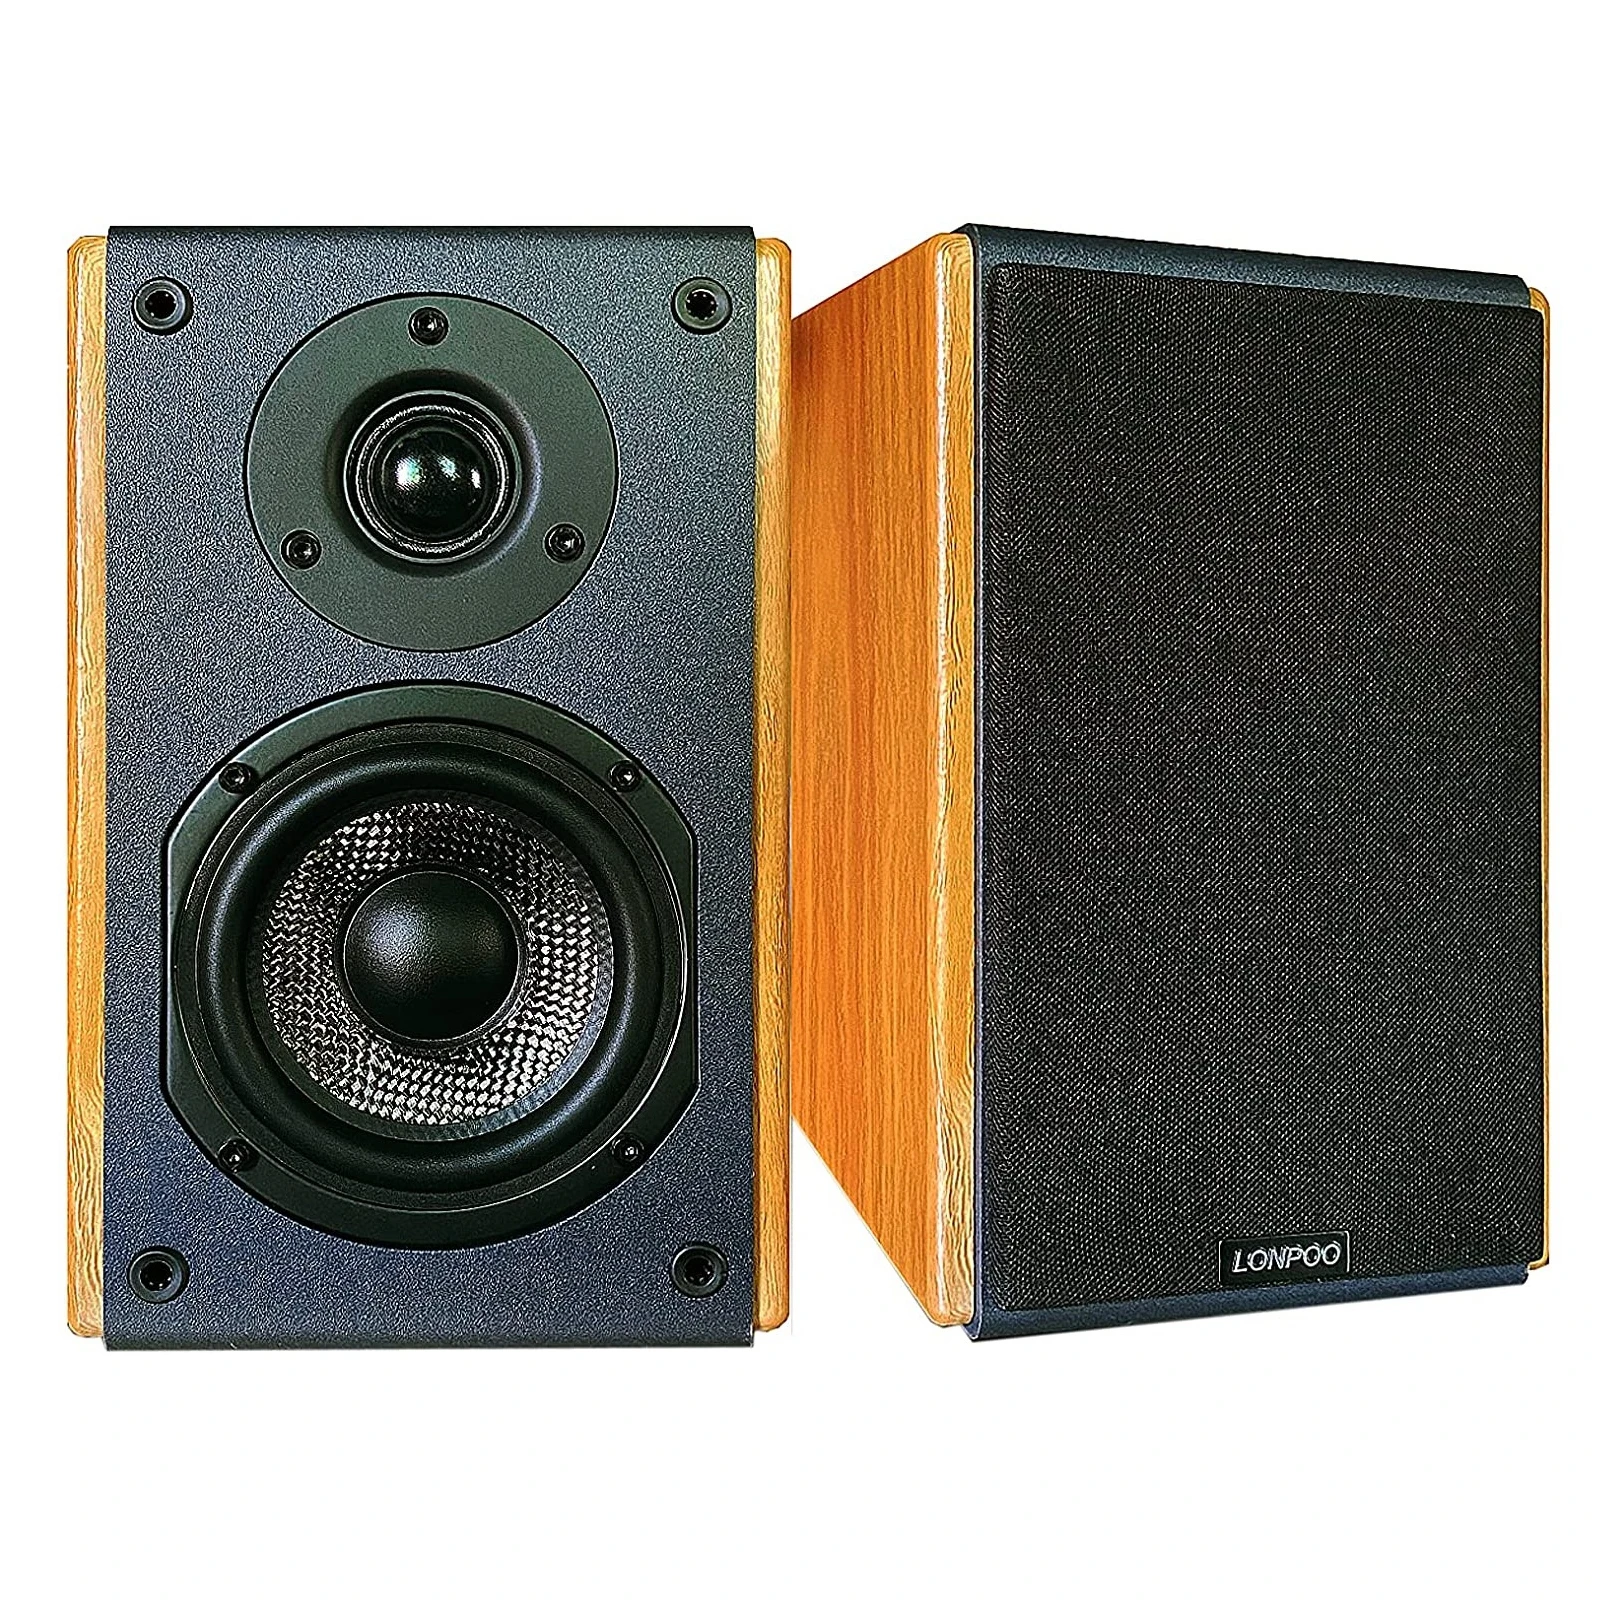 

Bookshelf hifi Speakers with 4-Inch Carbon Fiber Woofer and Silk Dome Tweeter lonpoo lp42